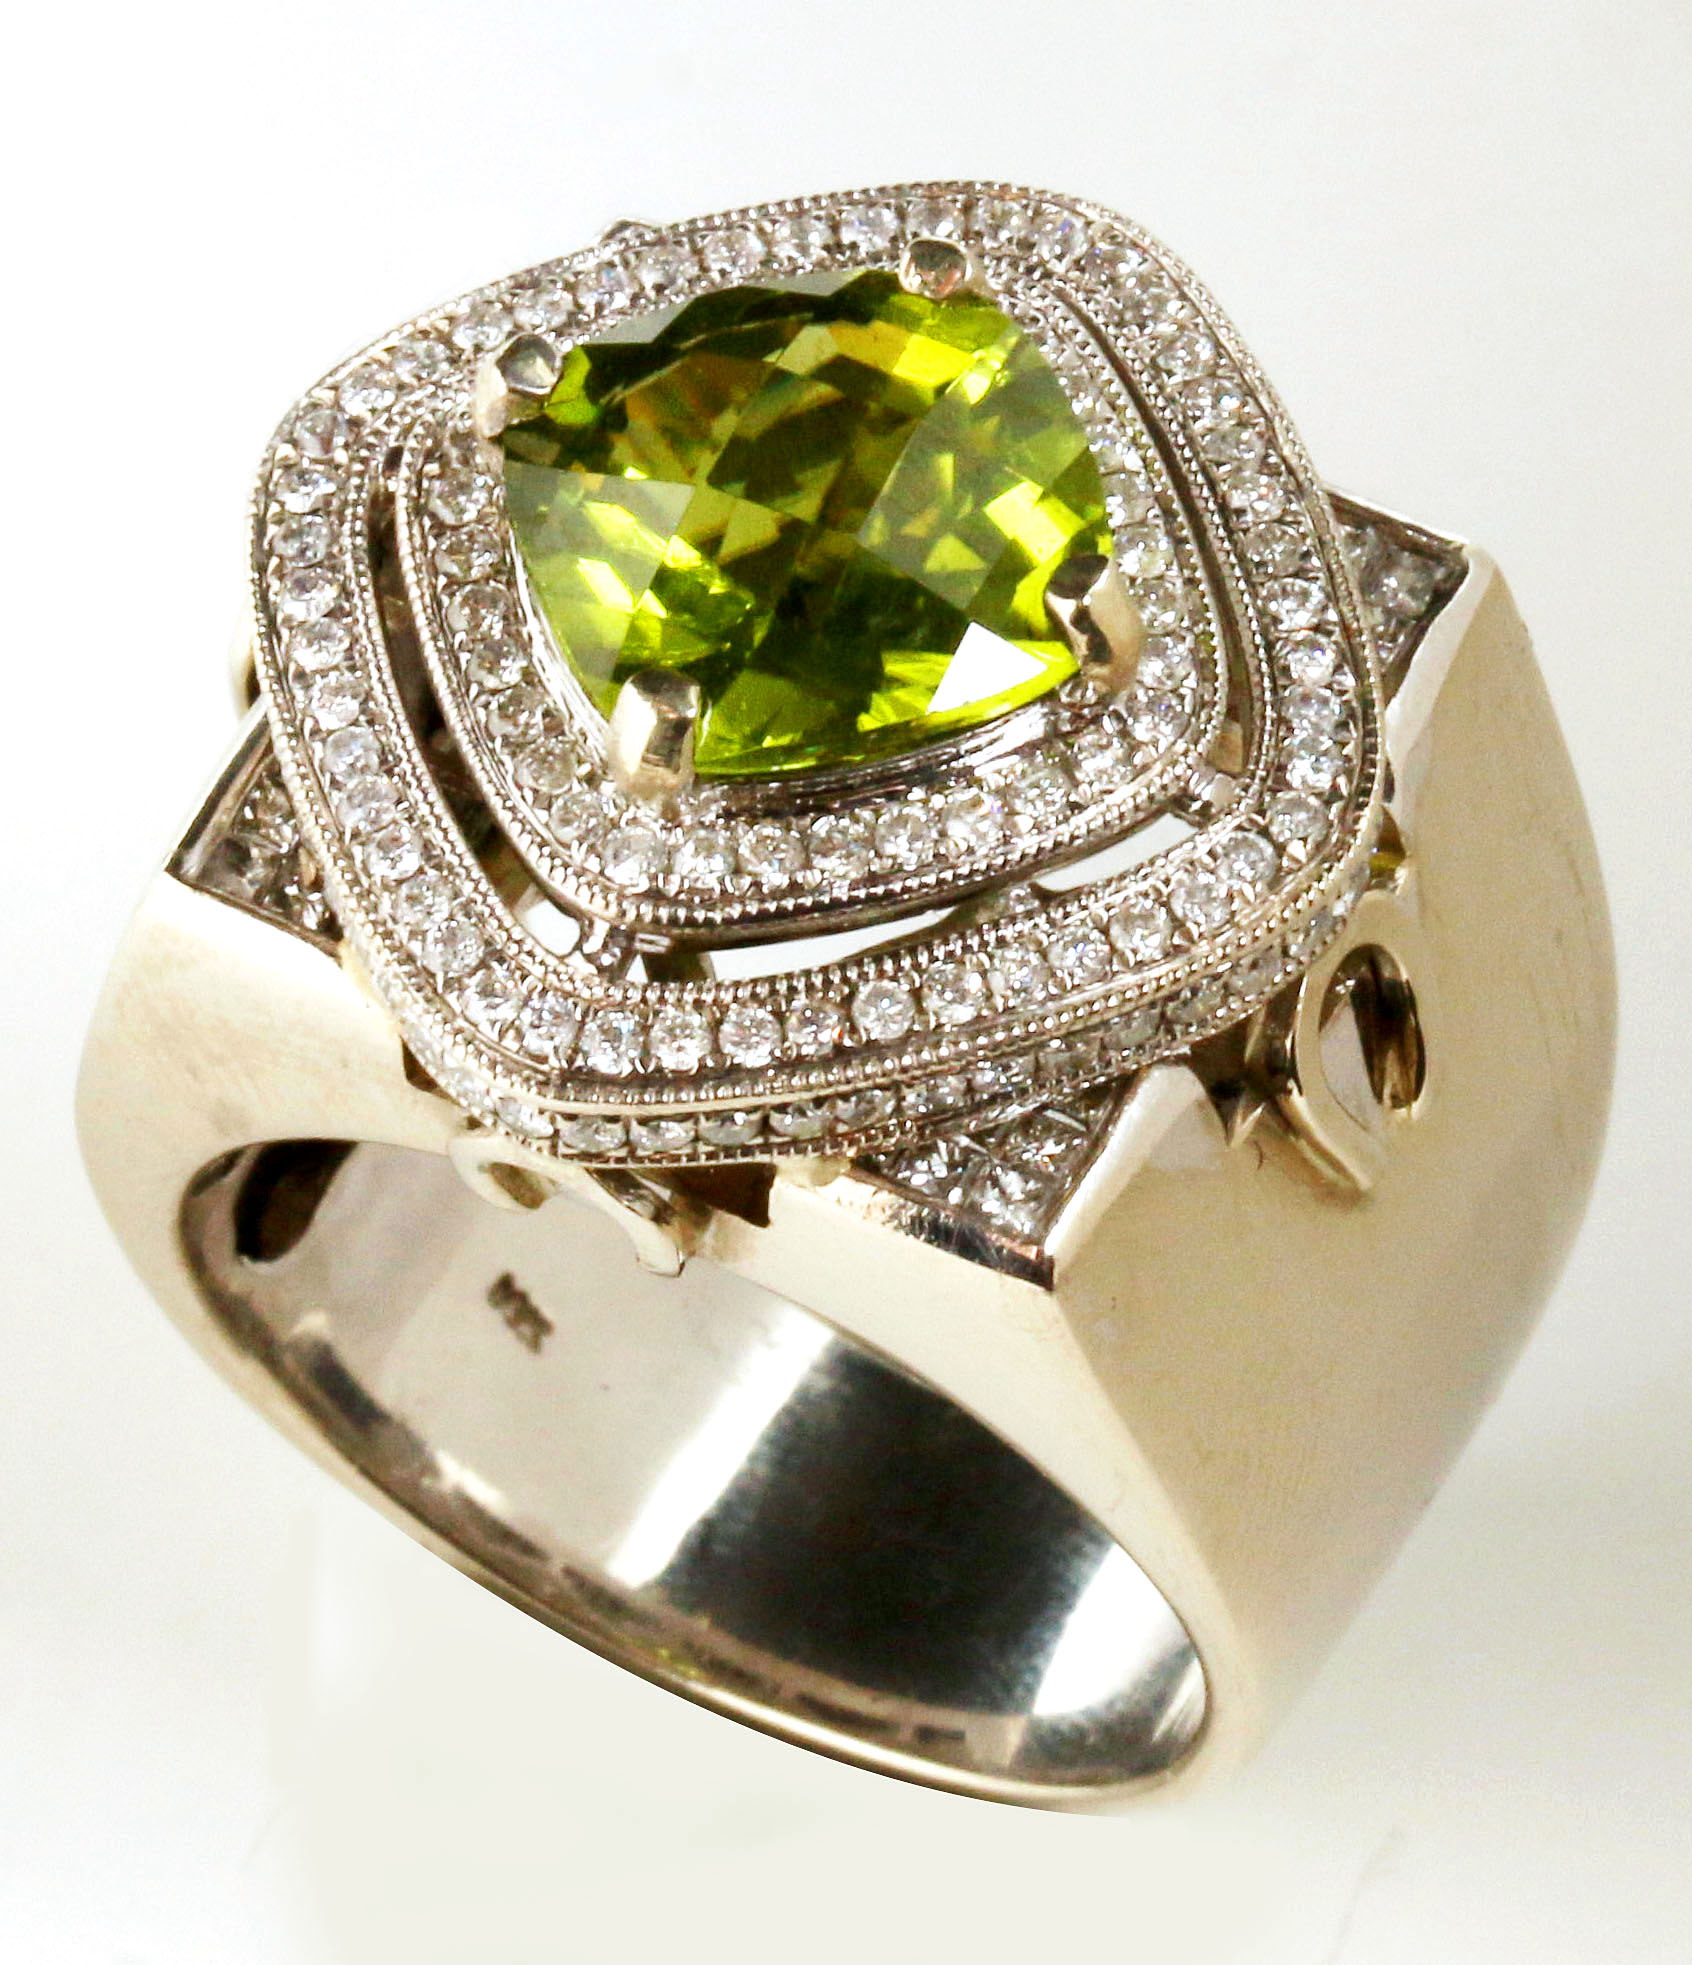 A 14K GENT'S DRESS RING WITH PERIDOT AND DIAMONDS